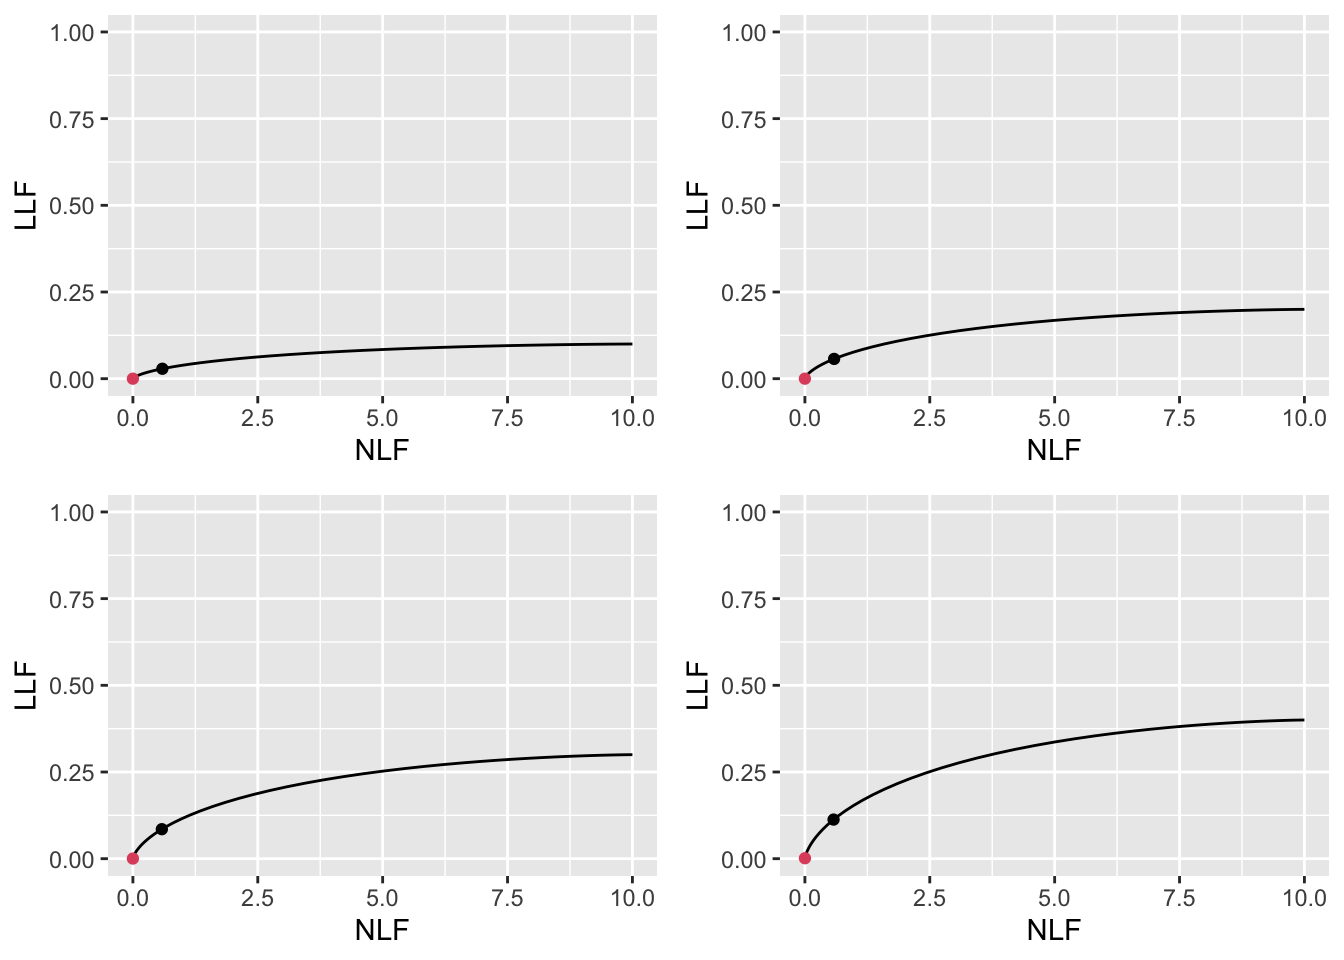 Low performance varying $\nu$ FROC plots with superimposed operating points. The red dot corresponds to $\text{wAFROC}_\text{AUC}$ optimization and the black dot to Youden-index optimization. The values of $\nu$ are: top-left $\nu = 0.1$, top-right $\nu = 0.2$, bottom-left $\nu = 0.3$ and bottom-right $\nu = 0.4$.